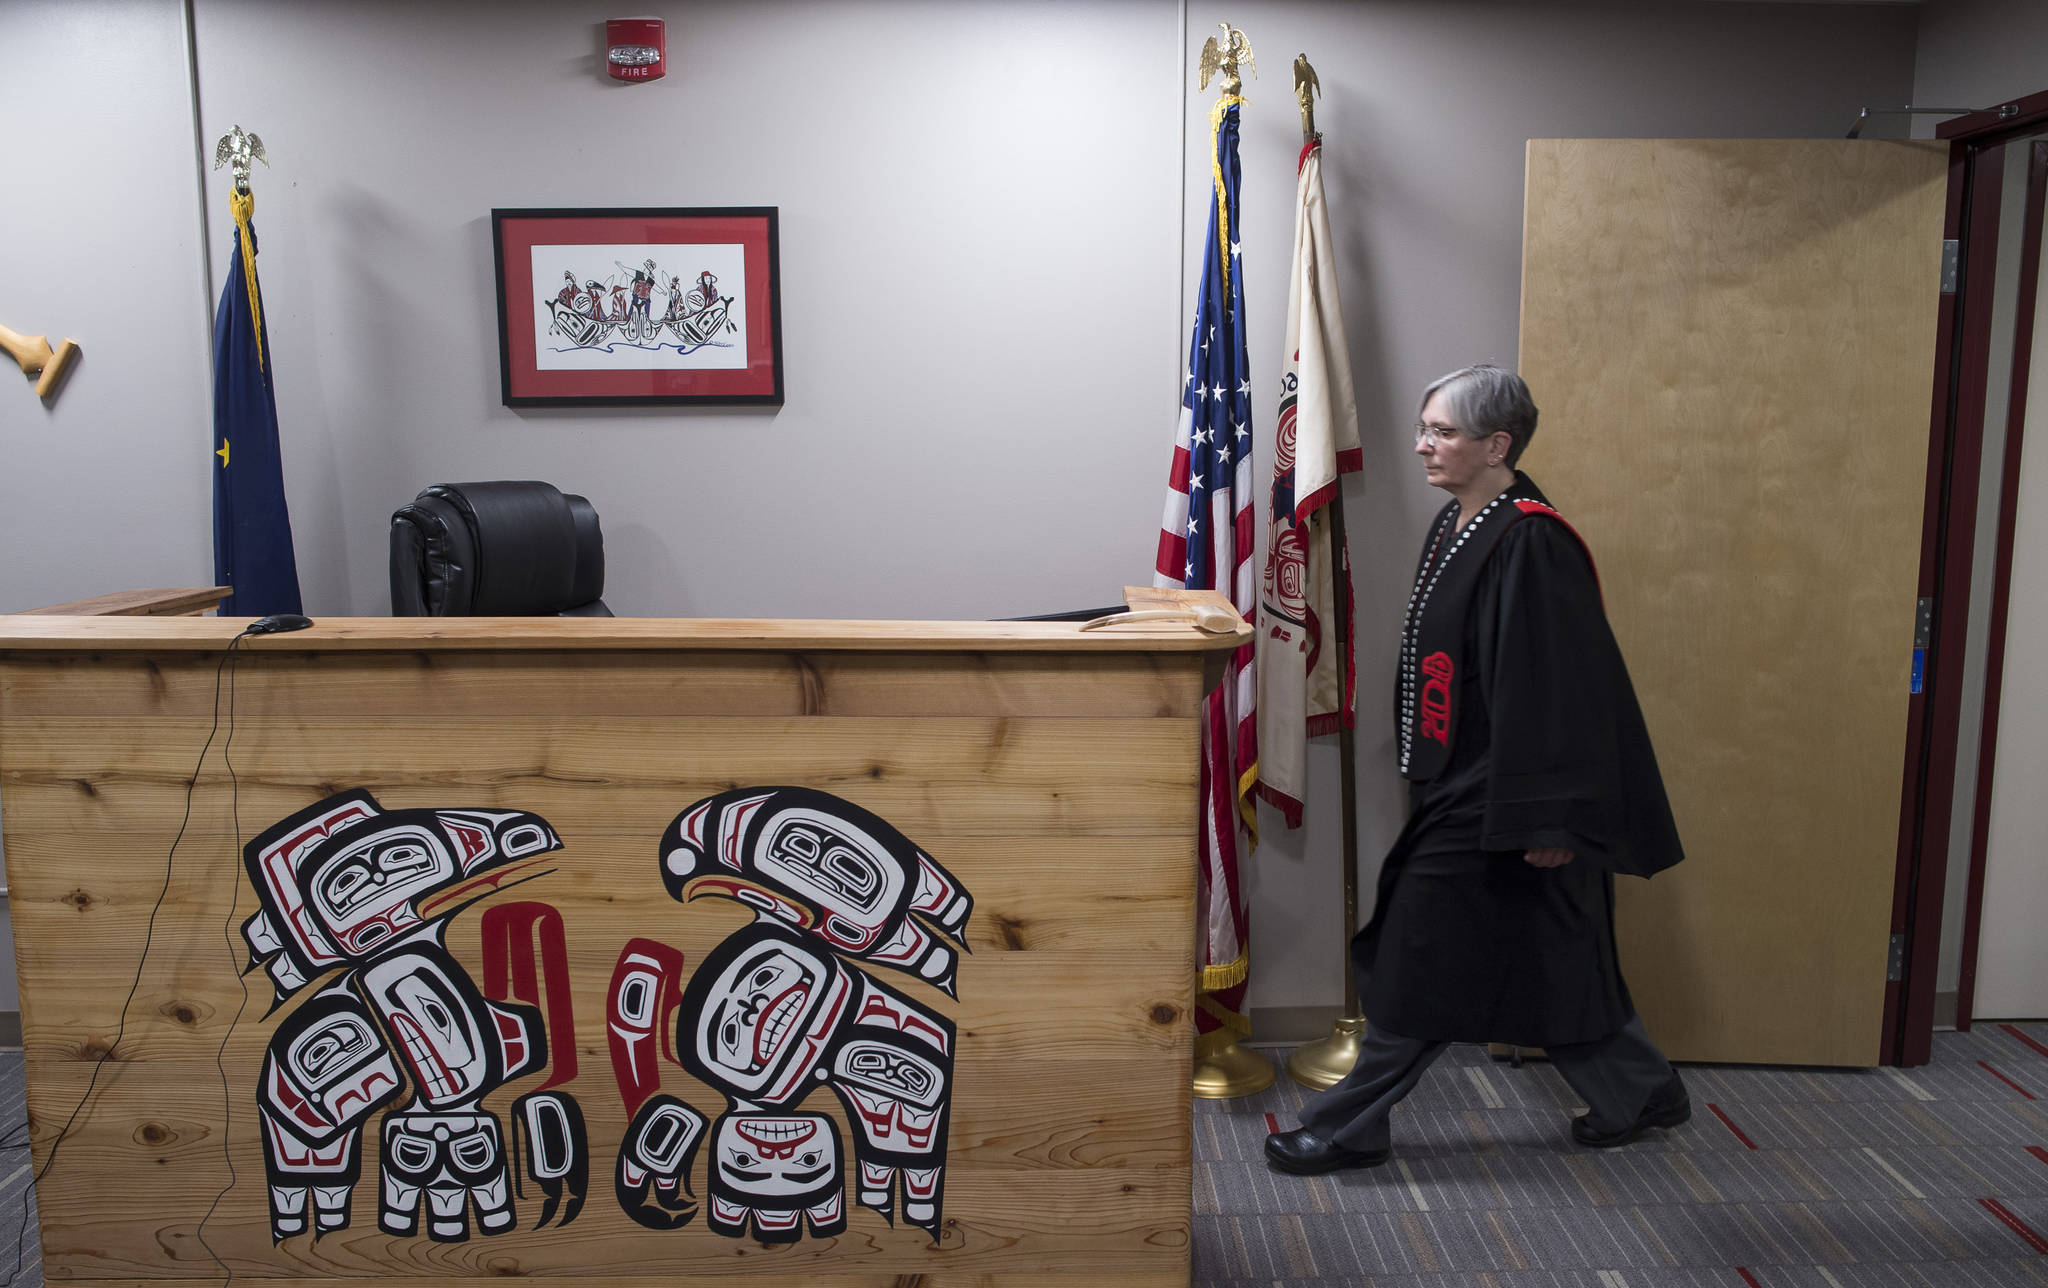 Judge Deb O’Gara enters the Central Council of Tlingit and Haida Indian Tribes of Alaska’s Tribal Court on Wednesday, March 14, 2018. Funding from federal grants will allow Tlingit and Haida to expand its court. (Michael Penn / Juneau Empire File)